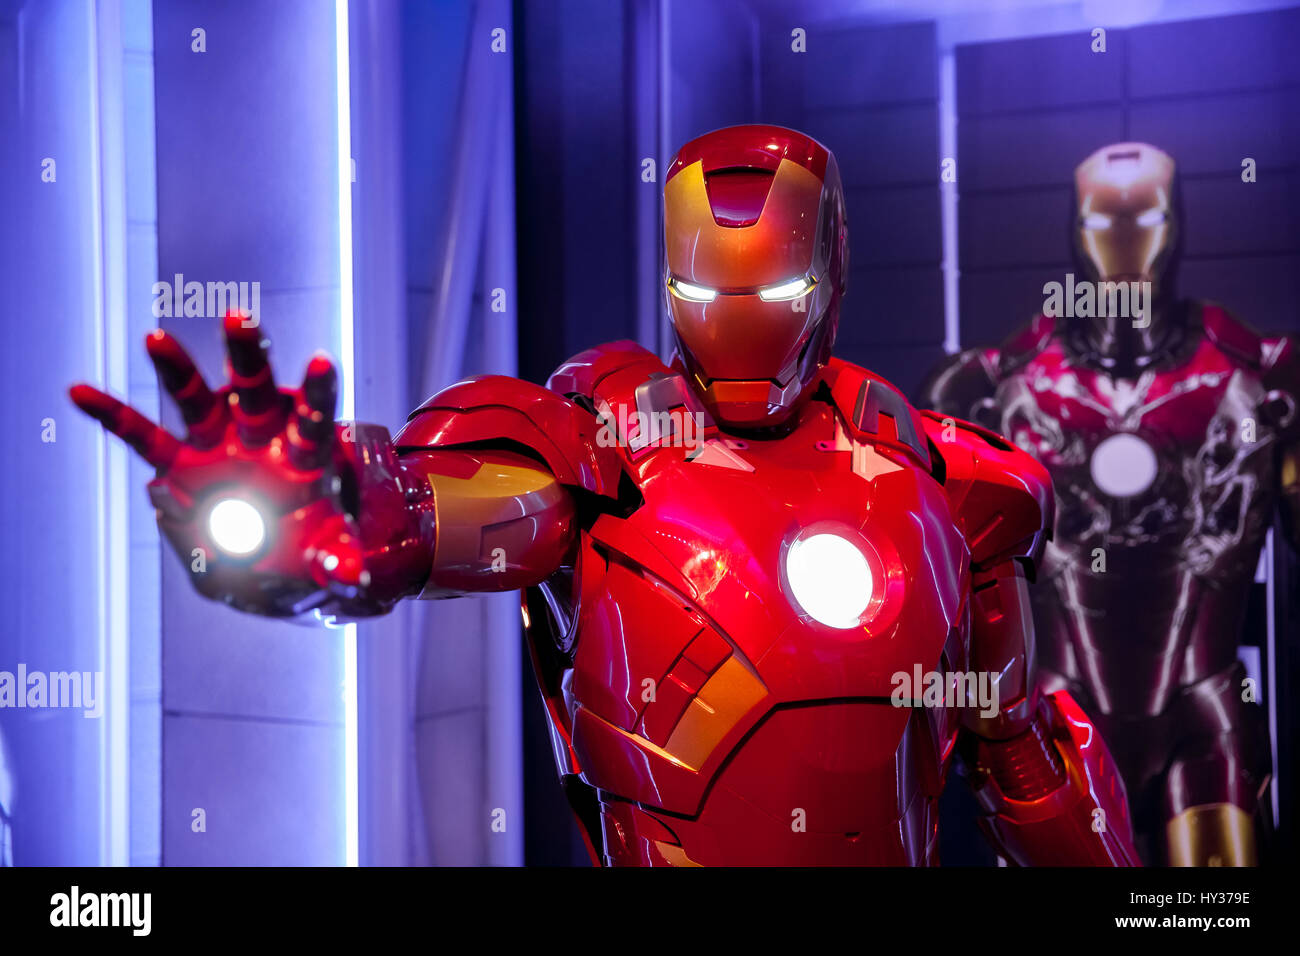 Amsterdam, Netherlands - March, 2017: Wax figure of Tony Stark the Iron Man from Marvel comics in Madame Tussauds Wax museum in Amsterdam, Netherlands Stock Photo